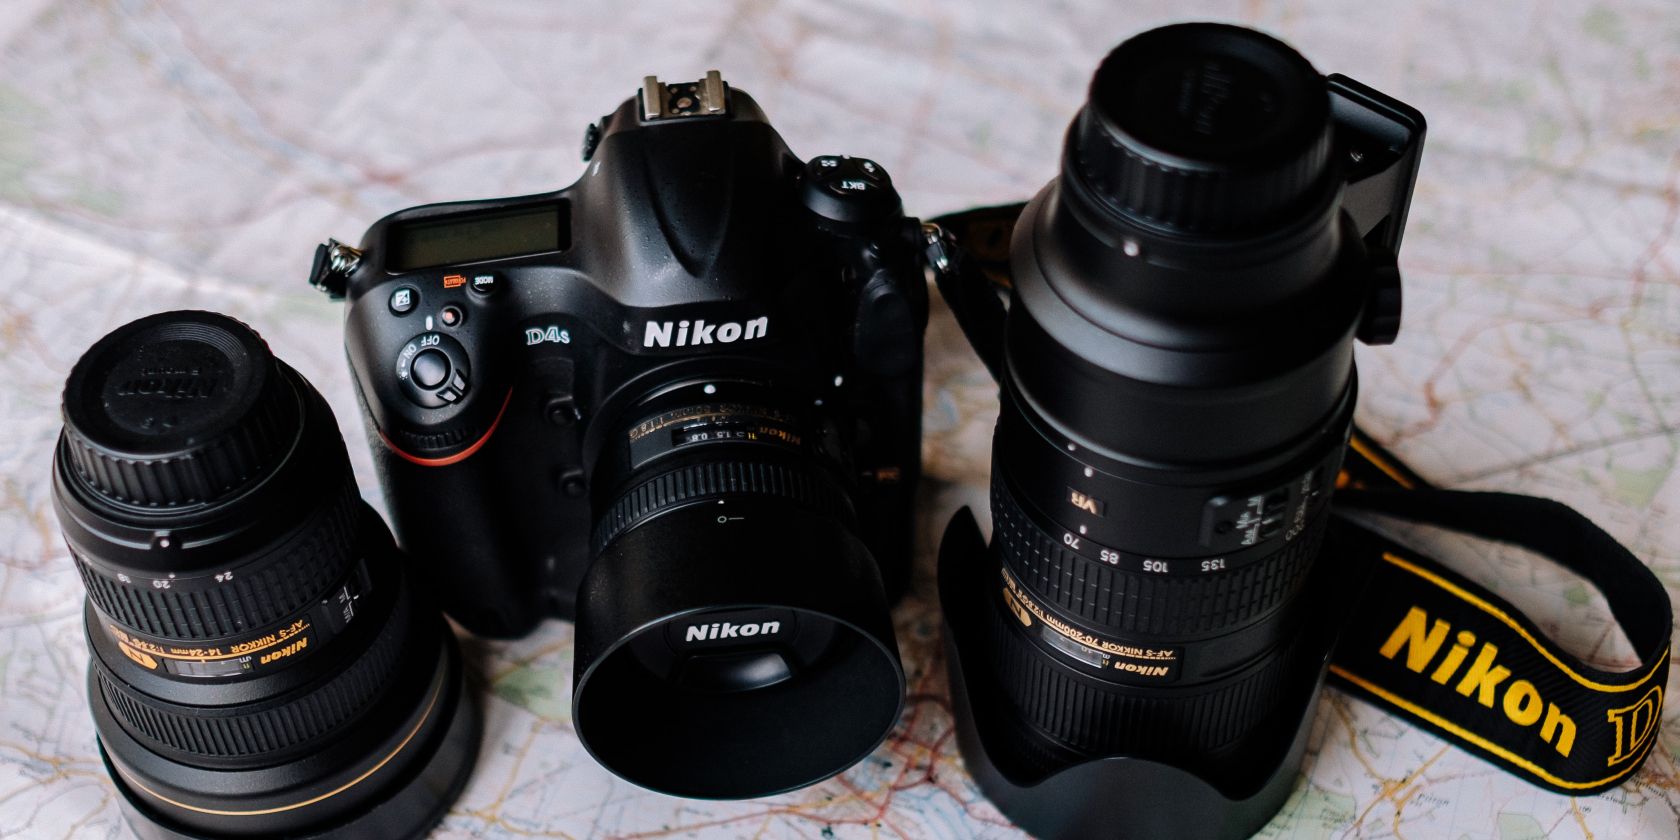 How to Get Good Pictures With a Budget DSLR: 8 Tips